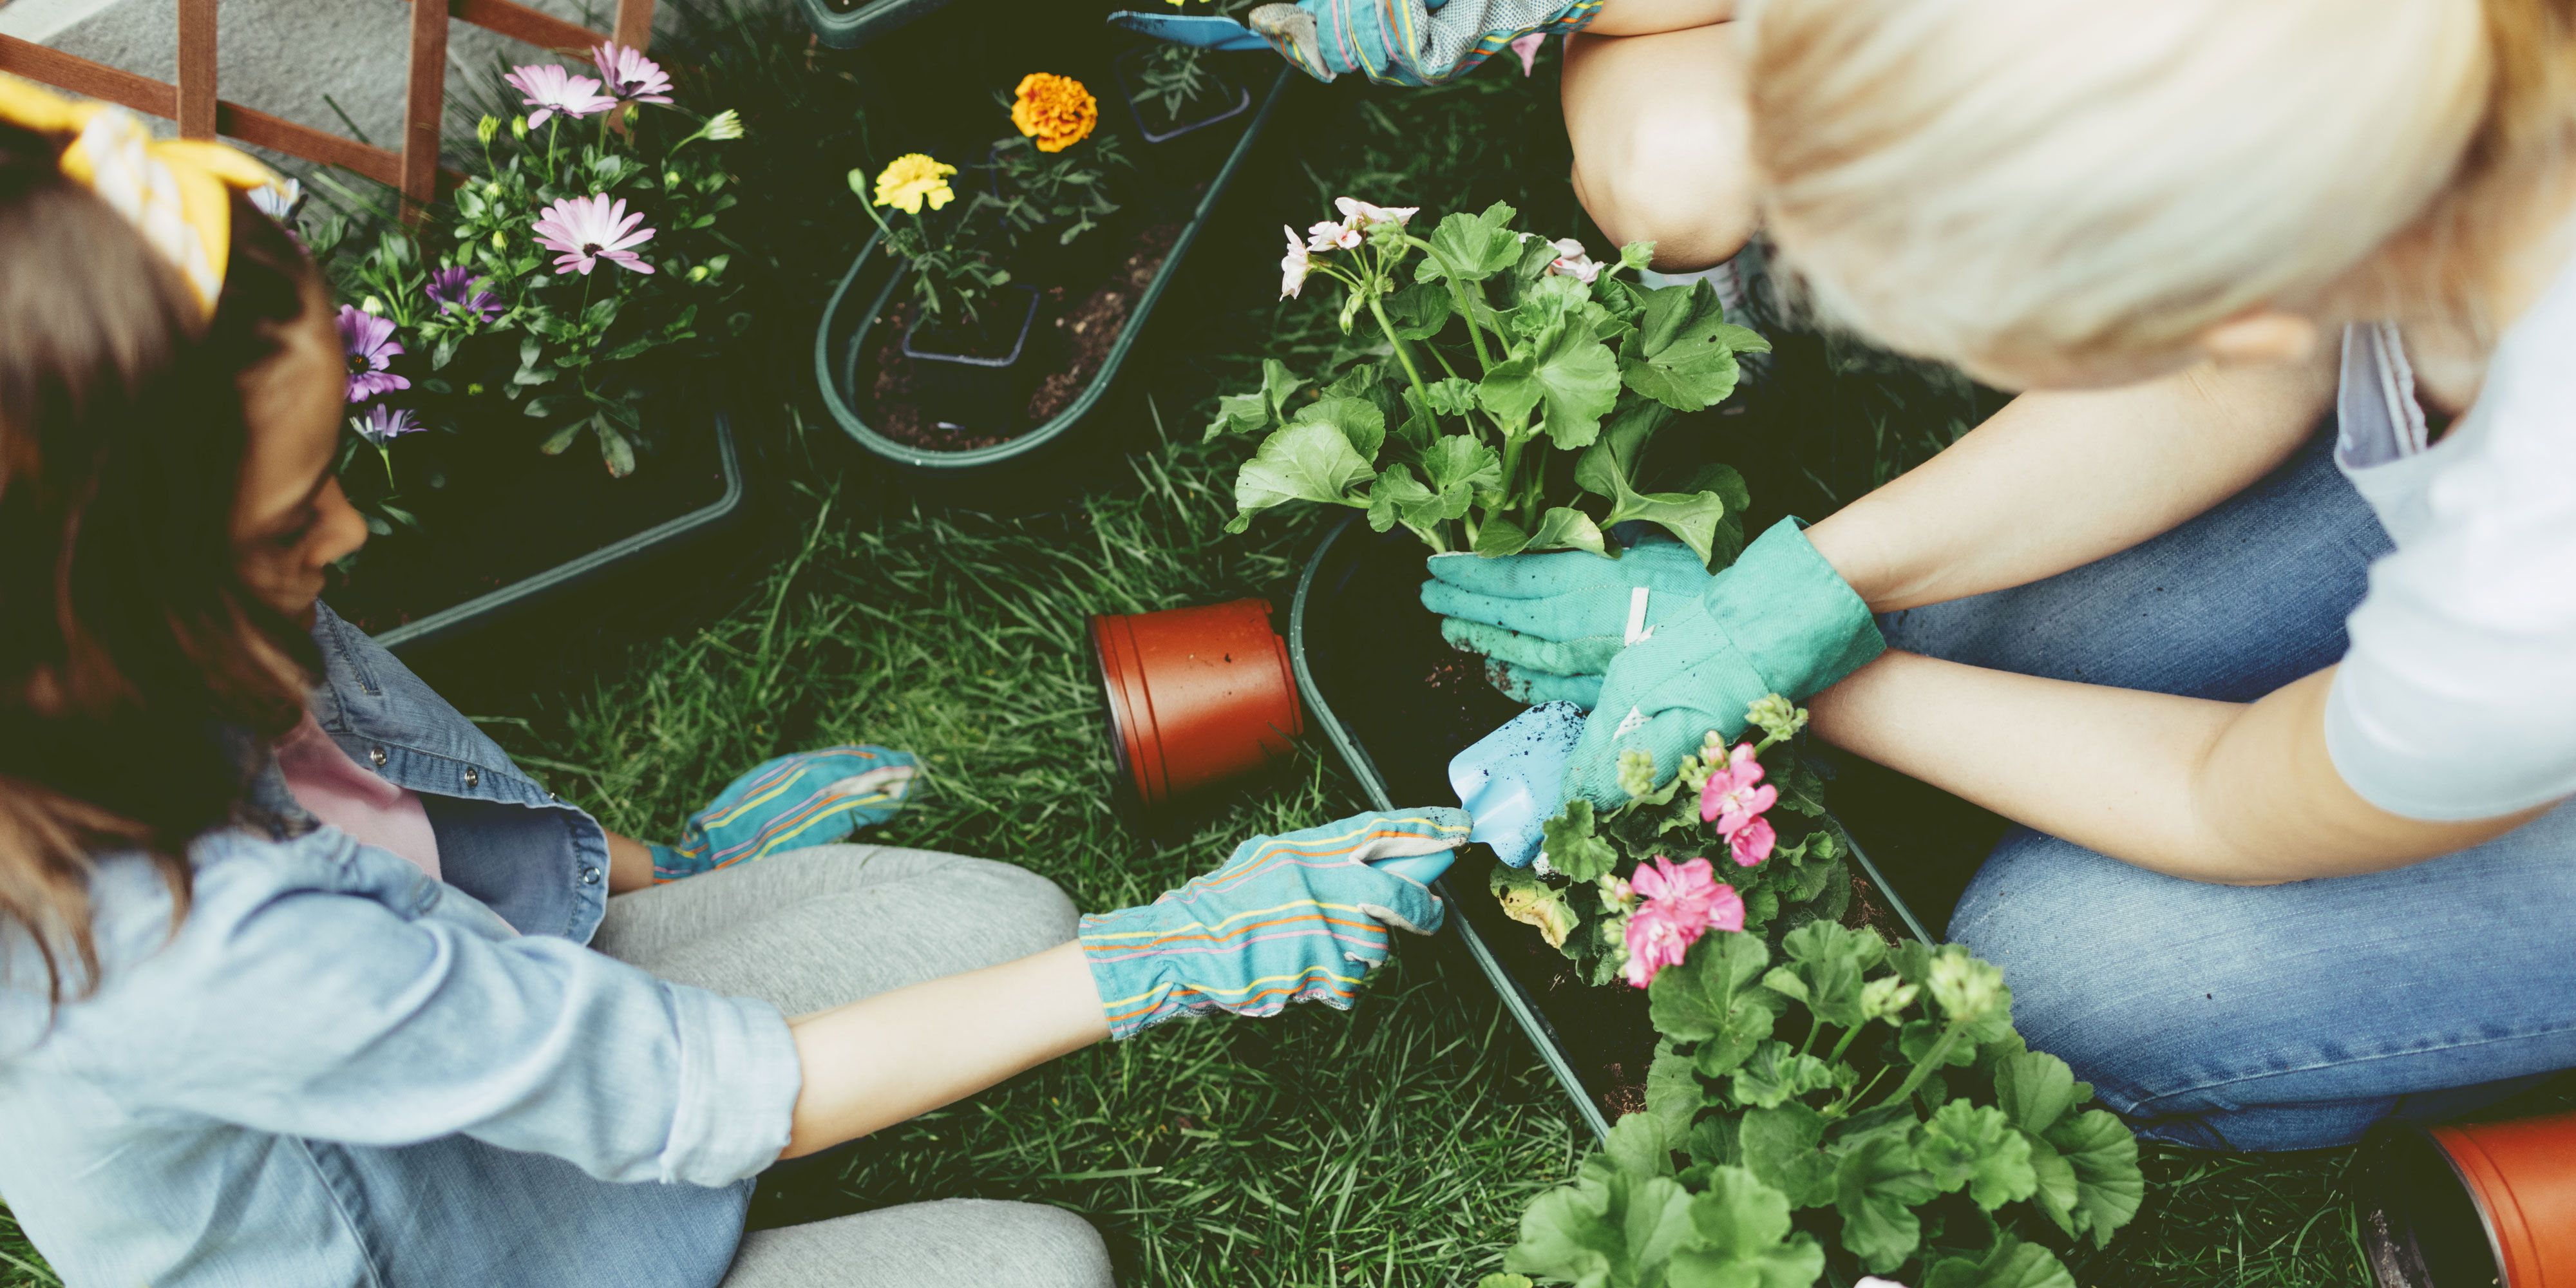 More doctors using gardening as therapy